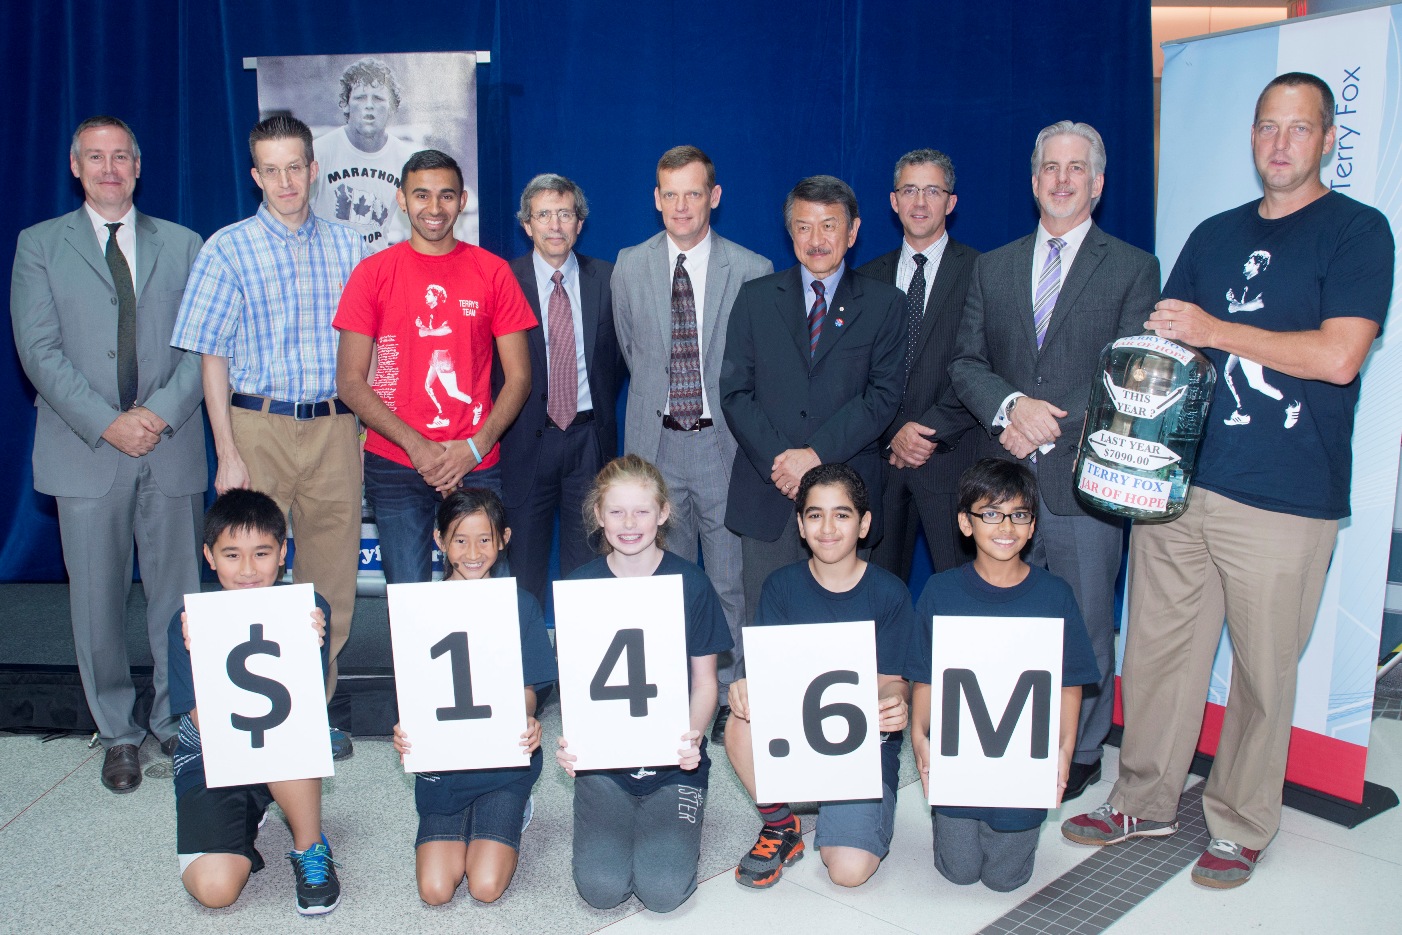 The announcement of the 2014 Terry Fox Program Project Grants